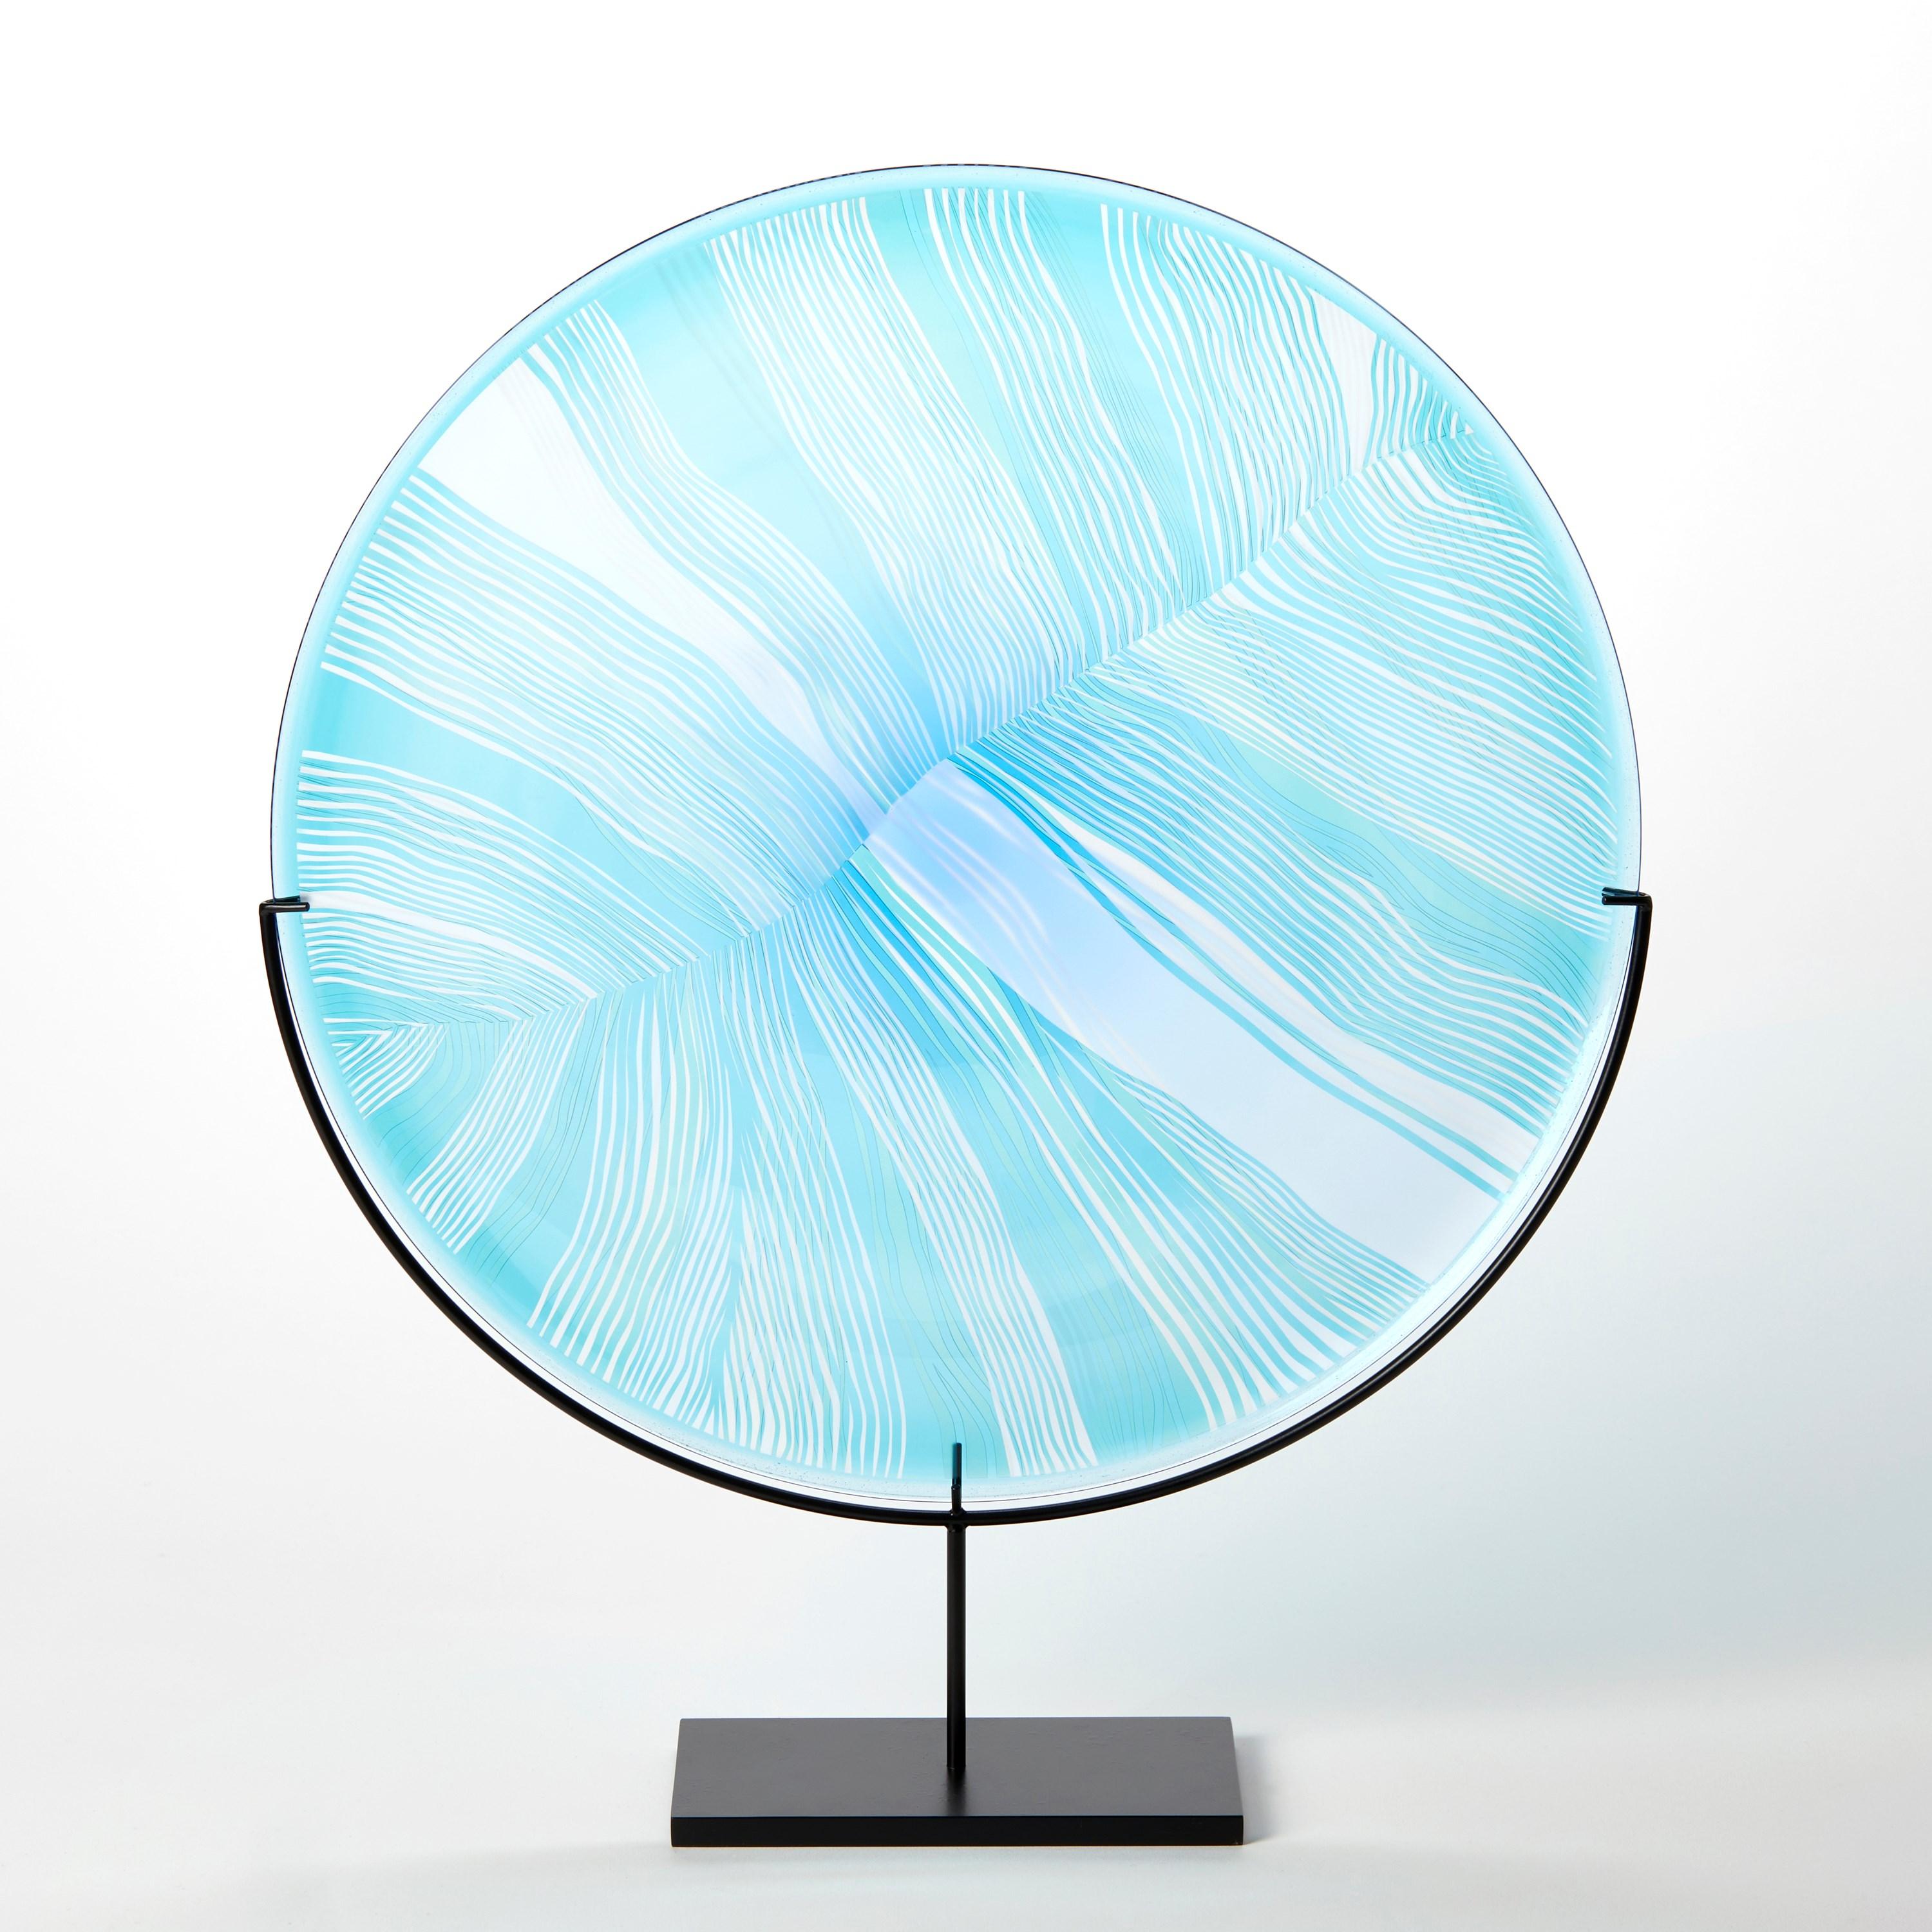 'Solar Storm Sky Blue over Ice Blue I' is a unique handblown and cut glass artwork by the British artist, Kate Jones of Gillies Jones.

In the artist's own words:

“This new body of work references both the evident structure of the landscape and the